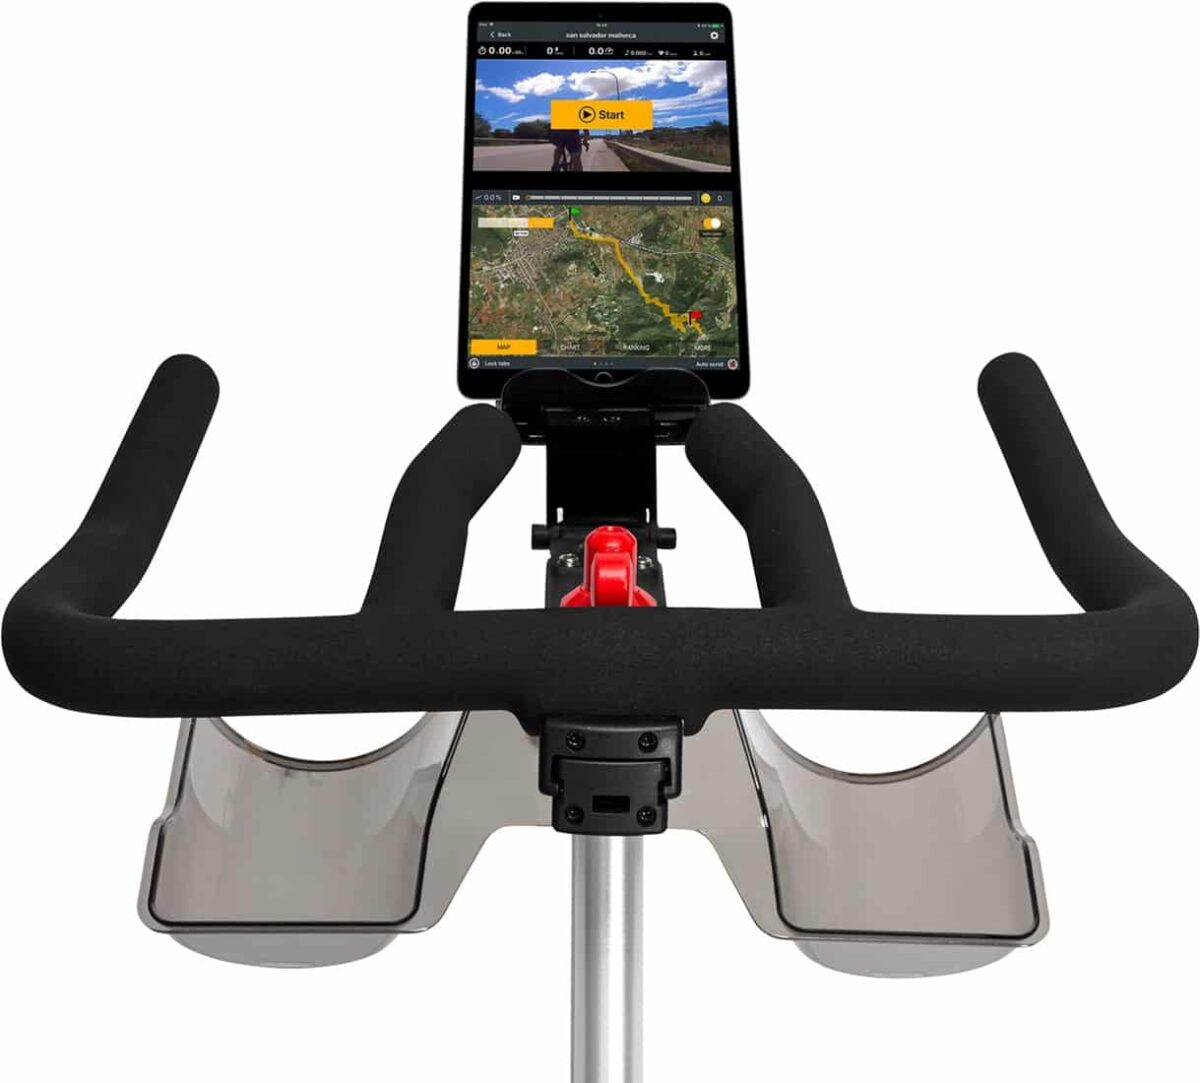 virtufit-indoor-cycle-s2i-spinningfiets-tablethouder